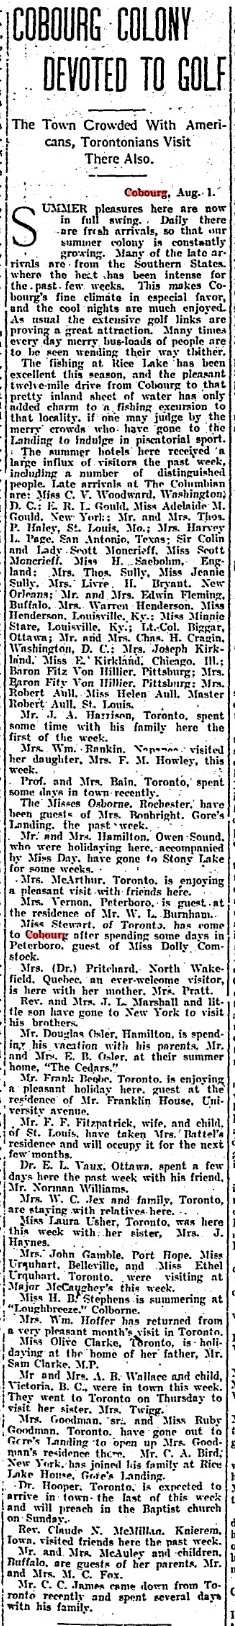 1903-08-01 Sports -Cobourg Colony Visitors-TO Star